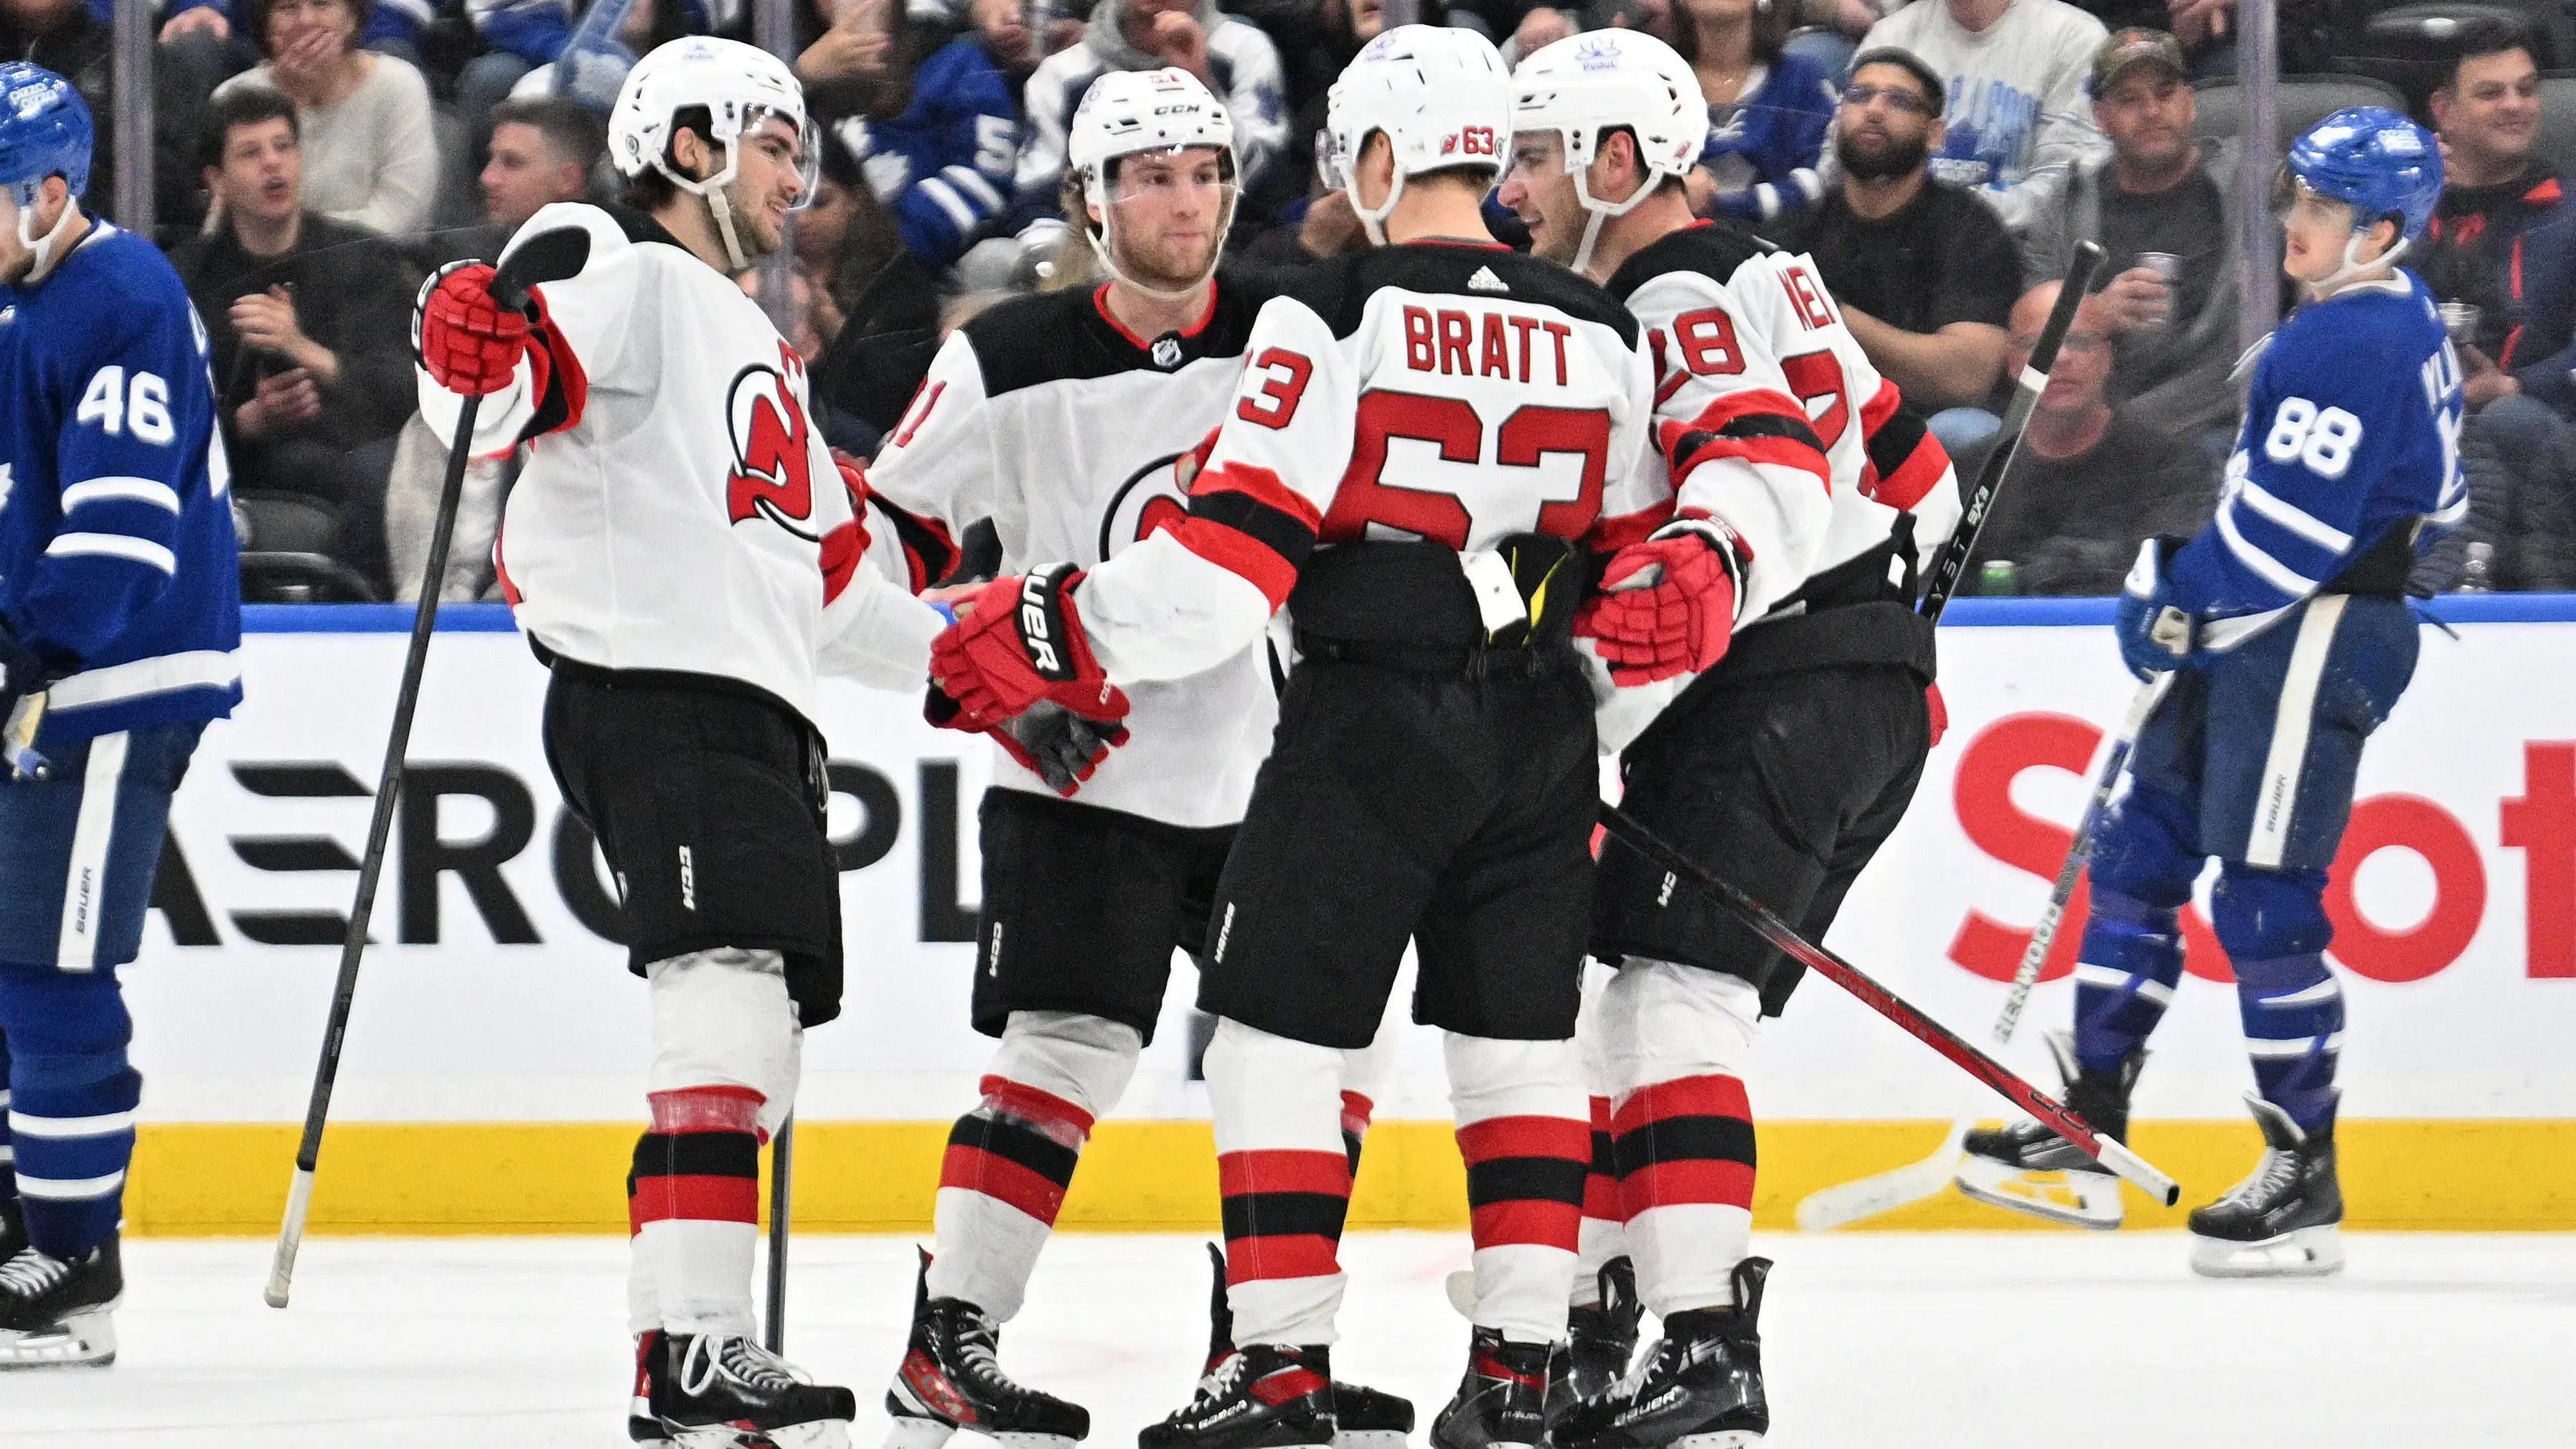 New Jersey Devils forward Jesper Bratt (63) celebrates with team mates after scoring a goal against the Toronto Maple Leafs in the third period at Scotiabank Arena / Dan Hamilton - USA TODAY Sports